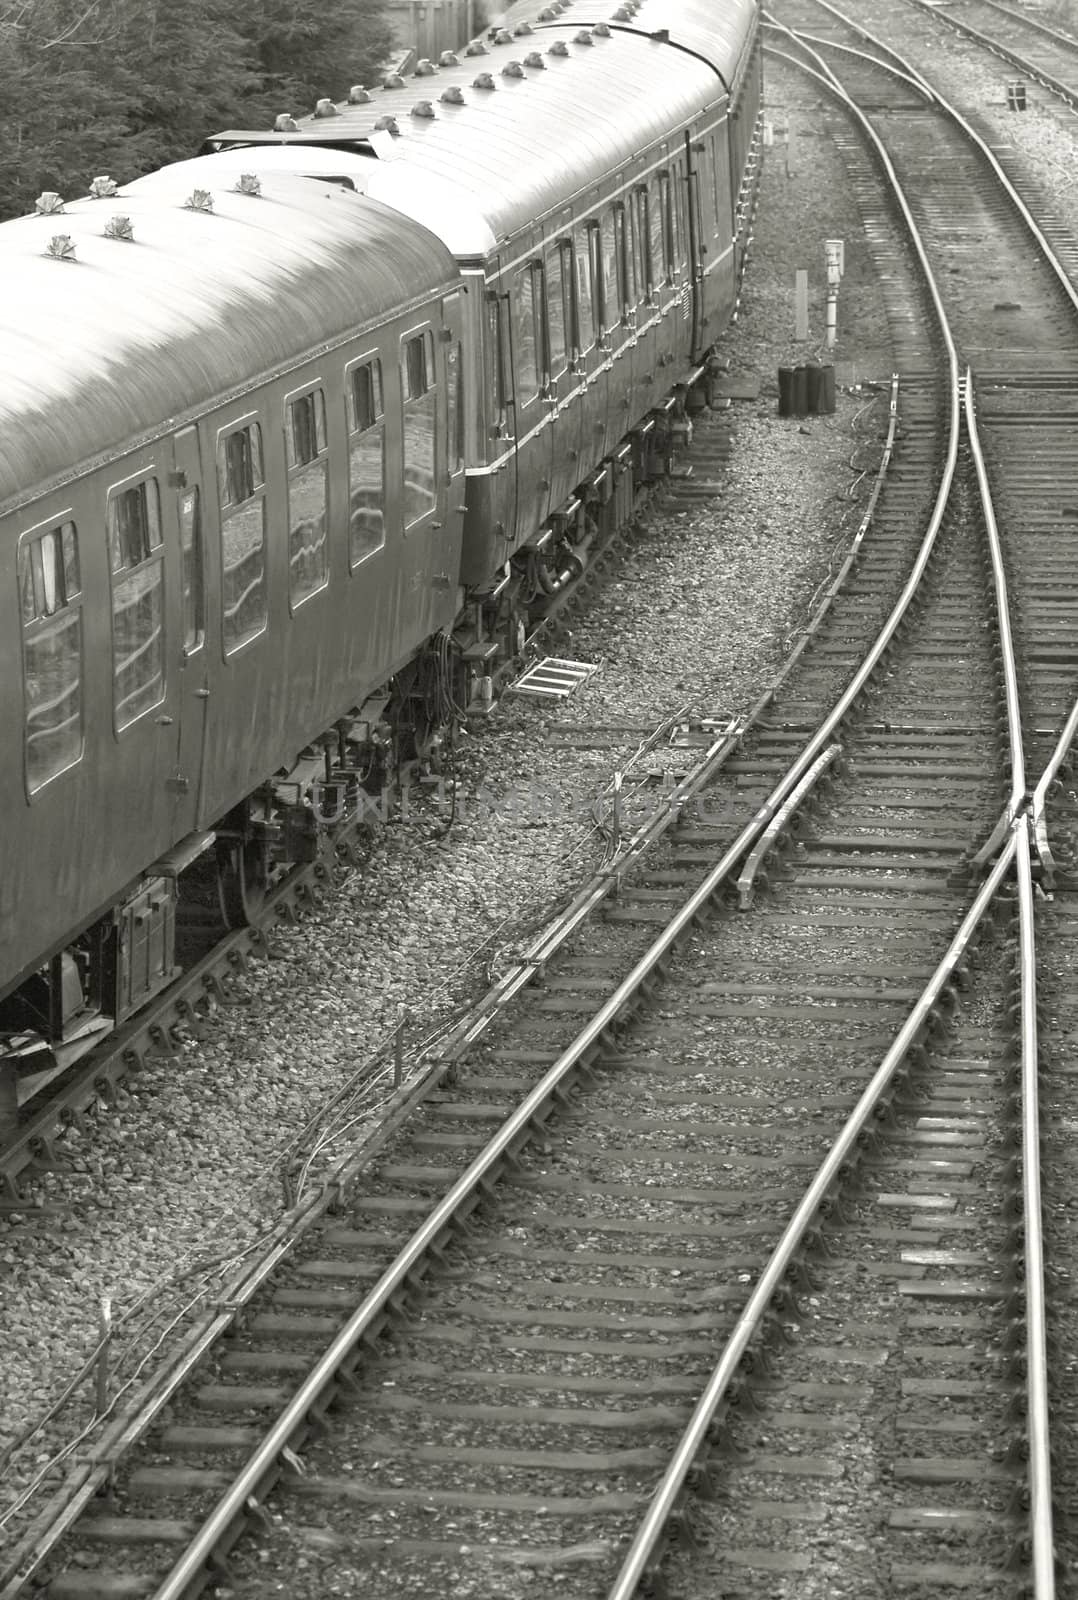 vintage train carriages with tracks curving into the distance